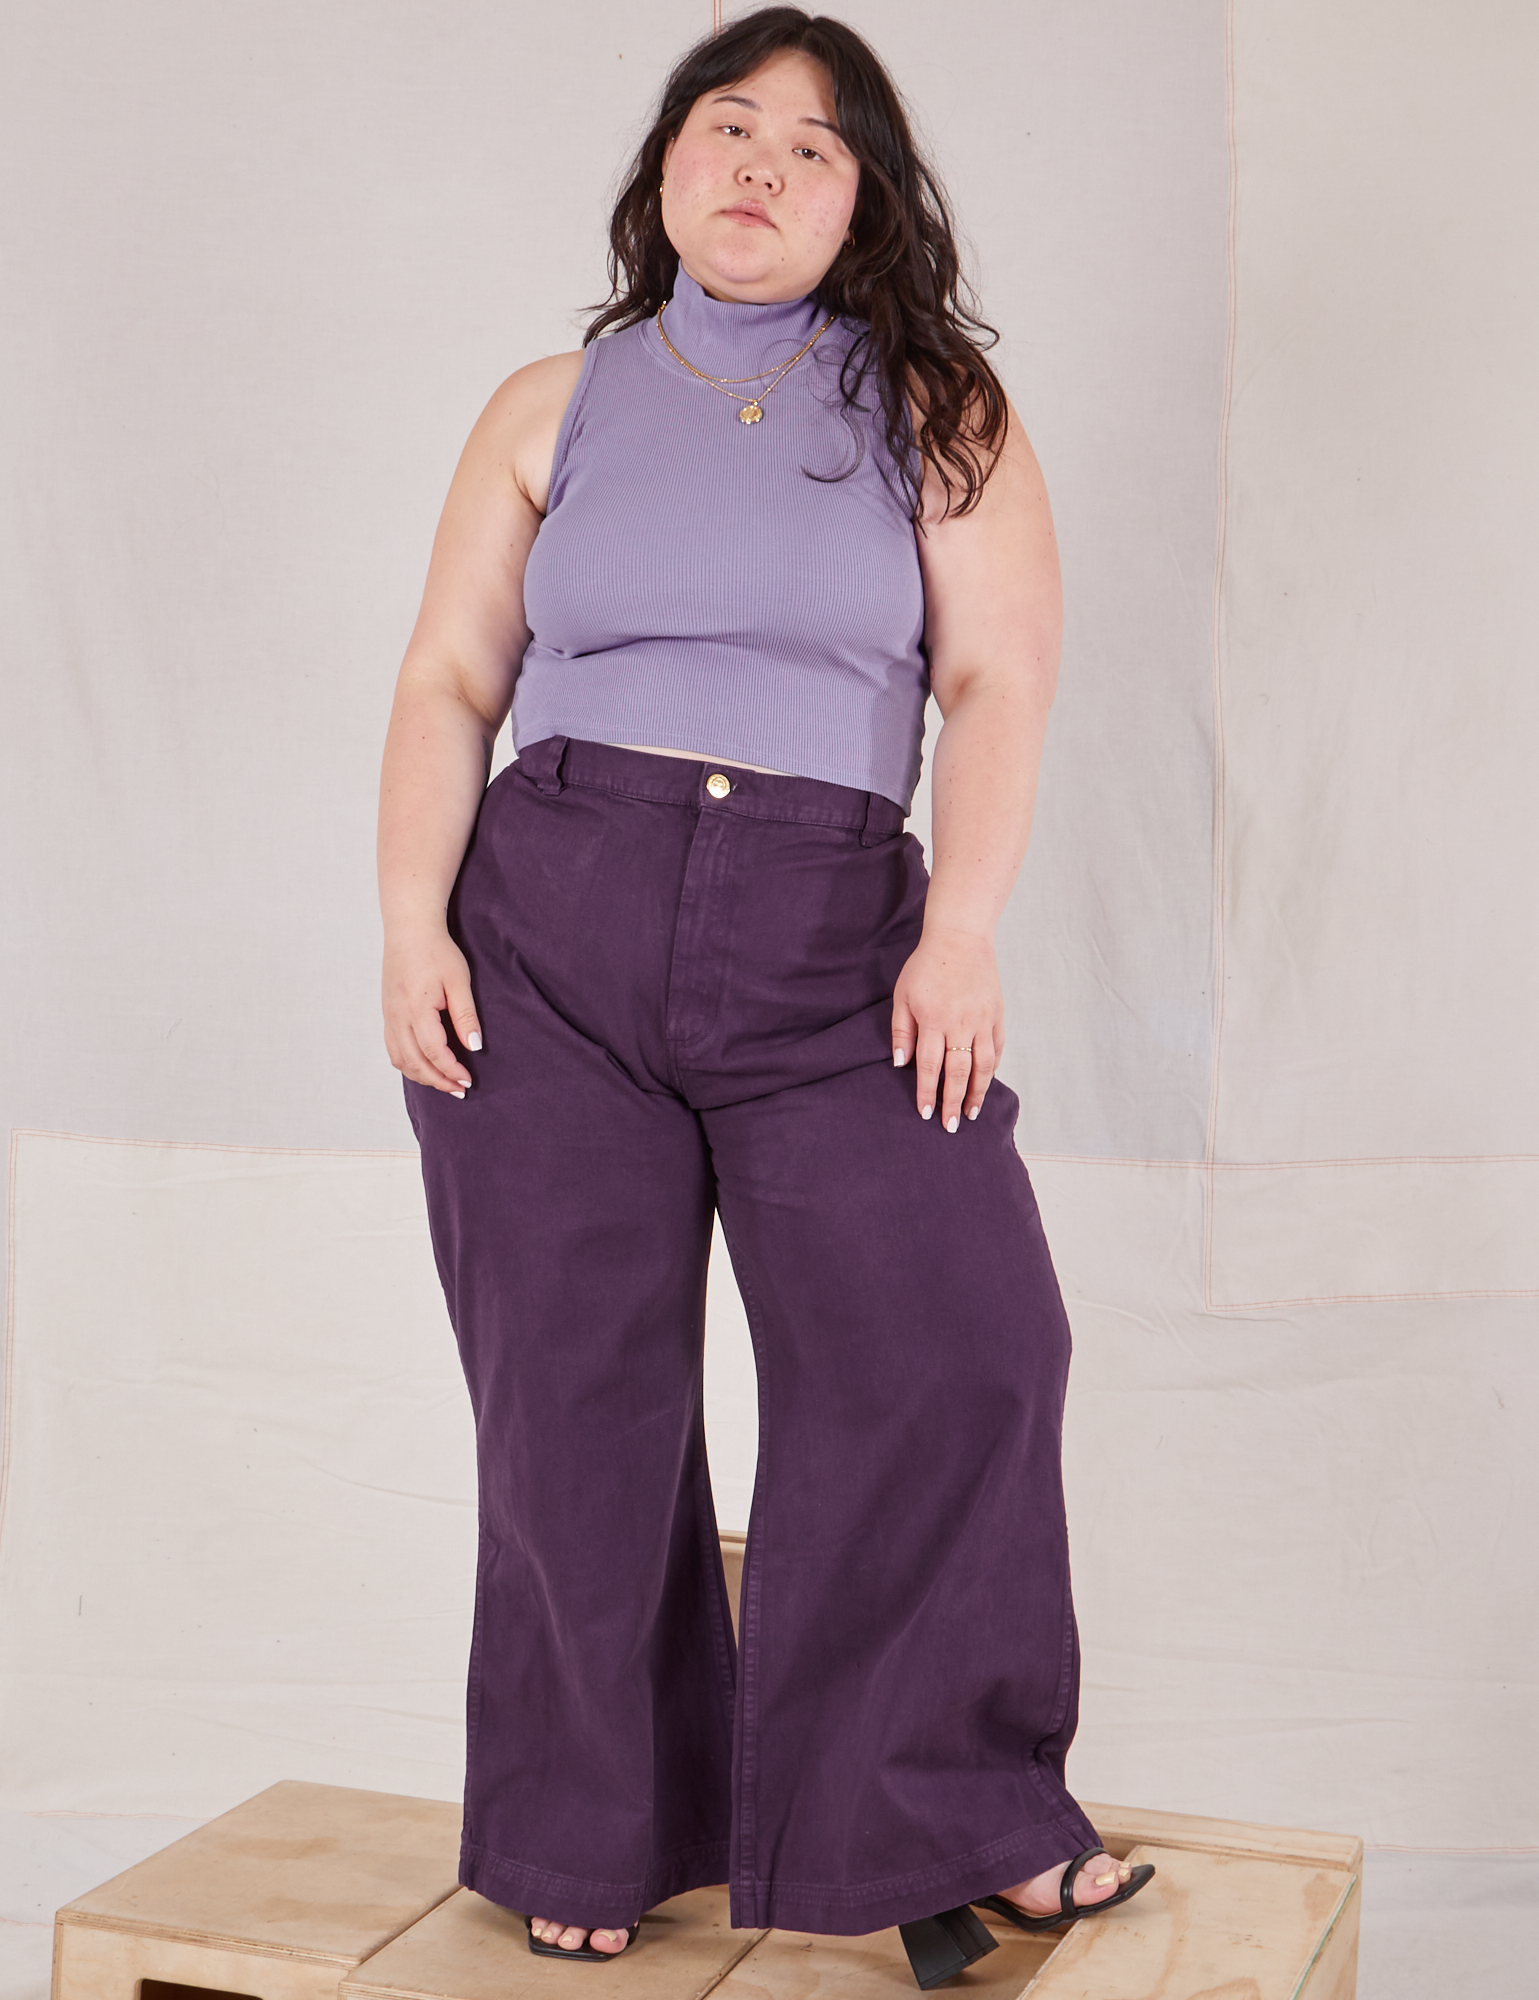 Ashley is wearing Sleeveless Essential Turtleneck in Faded Grape and nebula purple Bell Bottoms